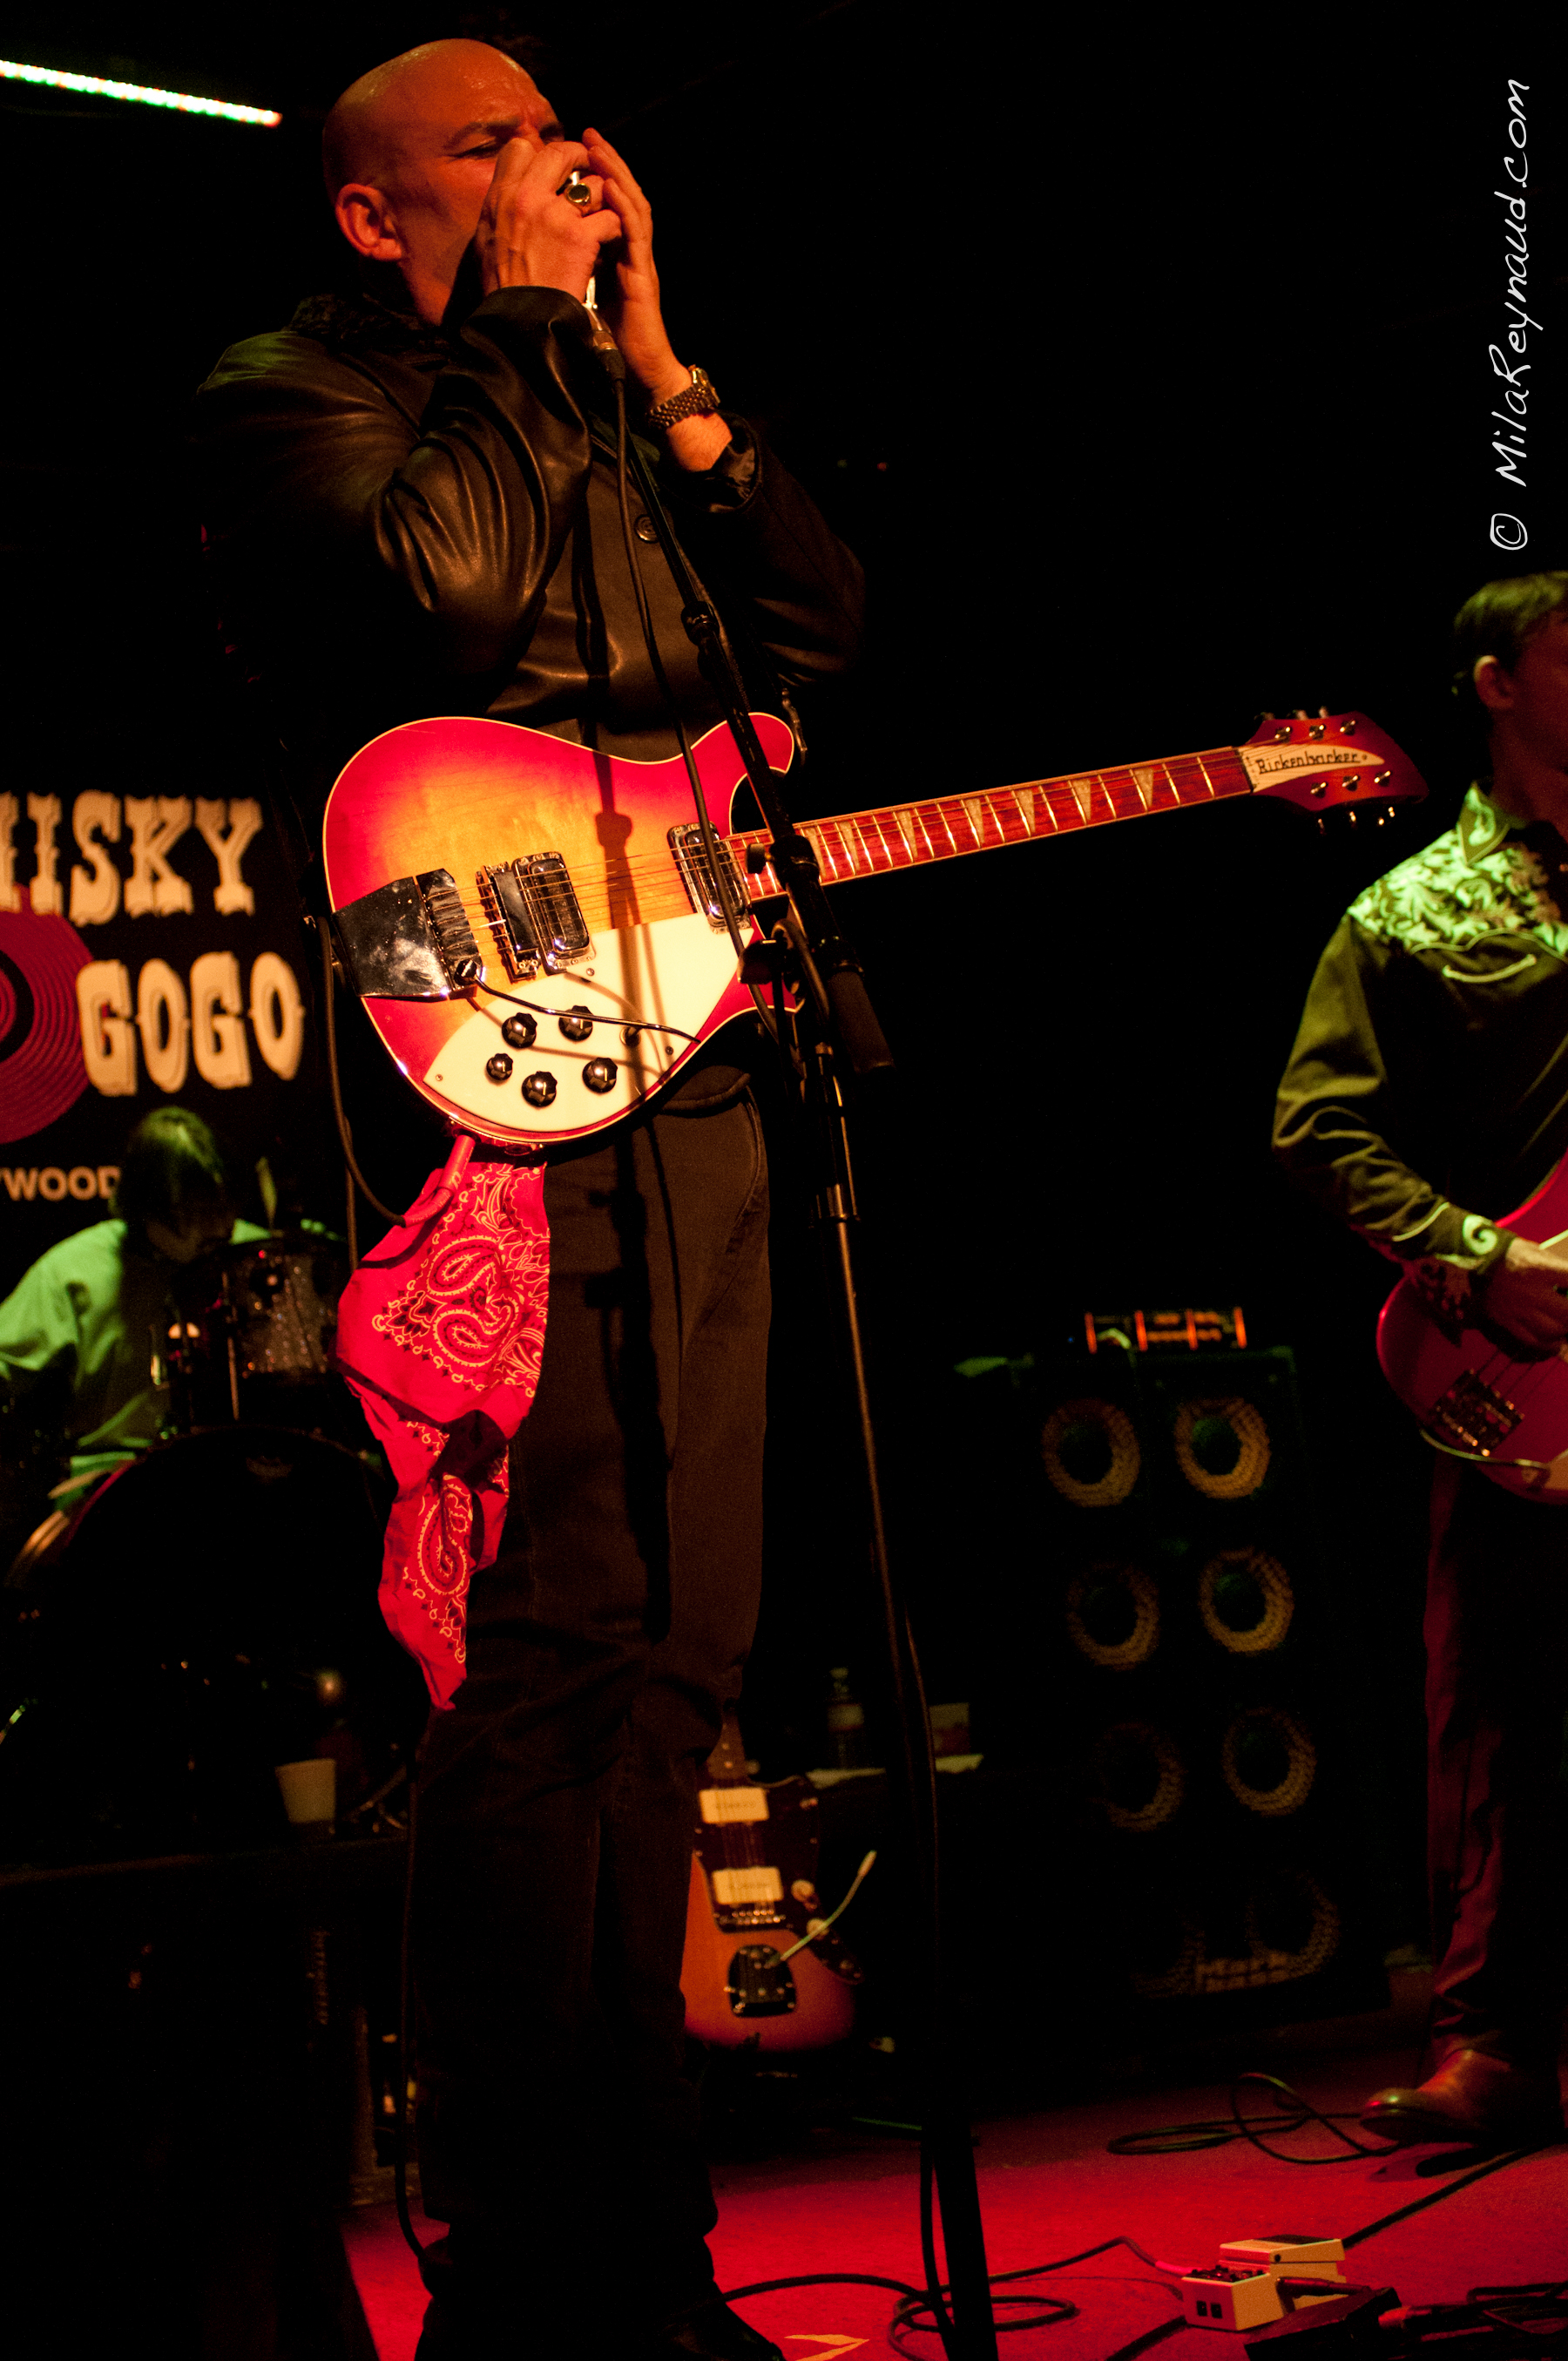 Sammy Busby with his Rickenbacker 620 performing with Dixie's Deceivers at the Whisky a Go Go, Hollywood, California.